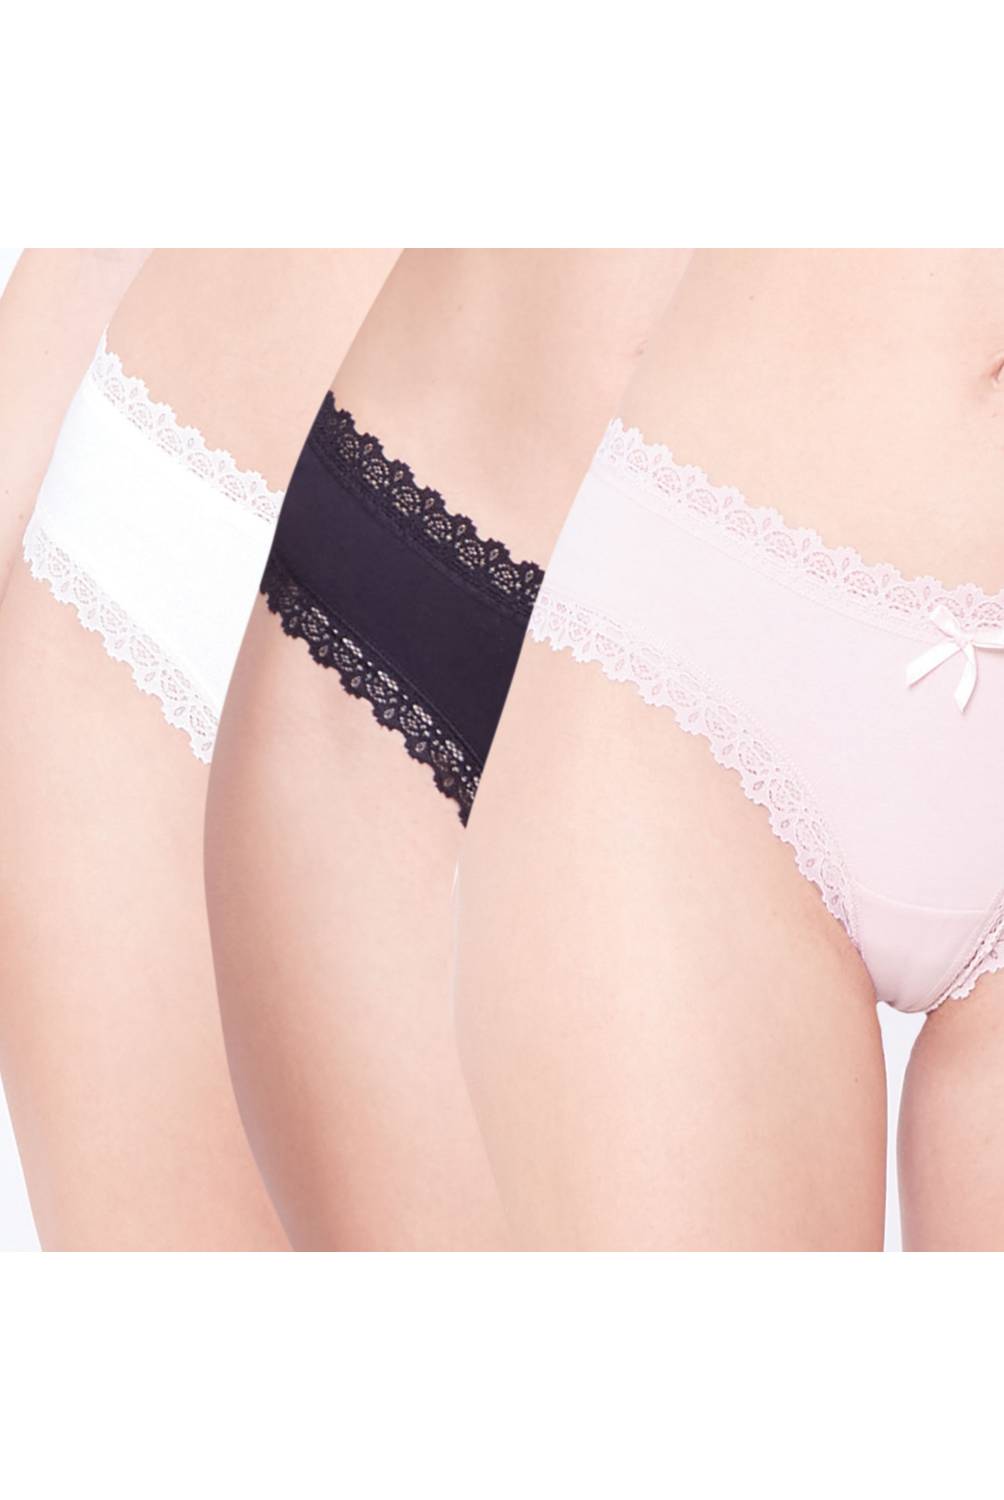 Pack De Tres Tangas Algodón Marca Intime Mujer Color Nude